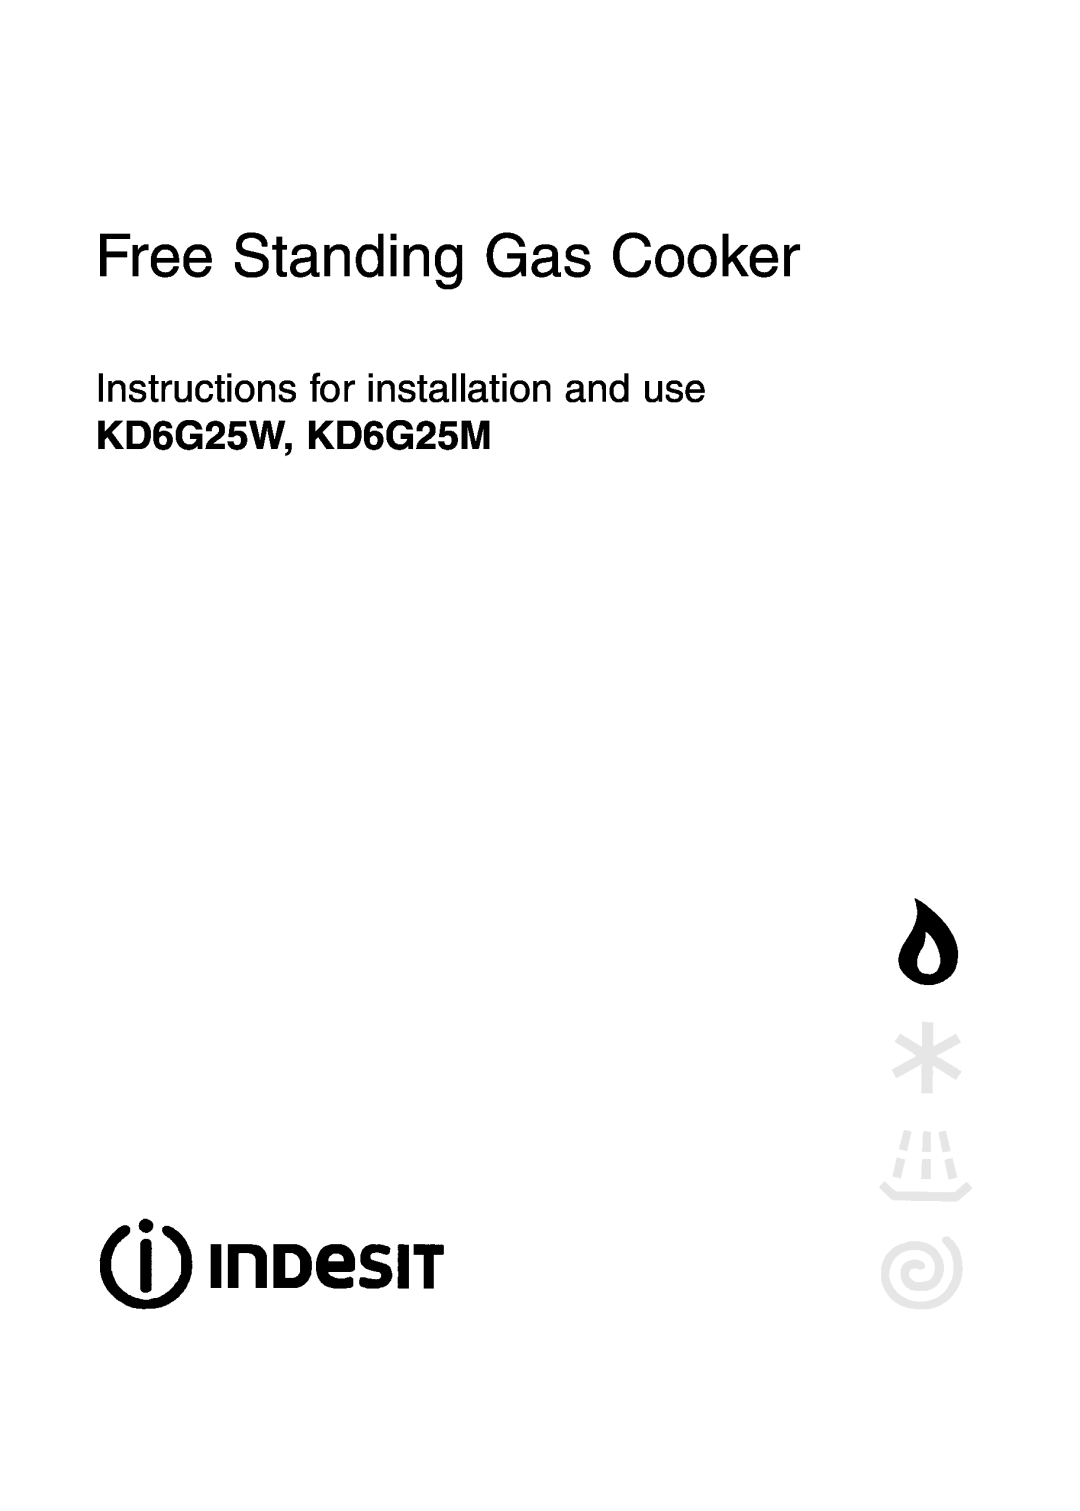 Indesit manual Free Standing Gas Cooker, Instructions for installation and use, KD6G25W, KD6G25M 